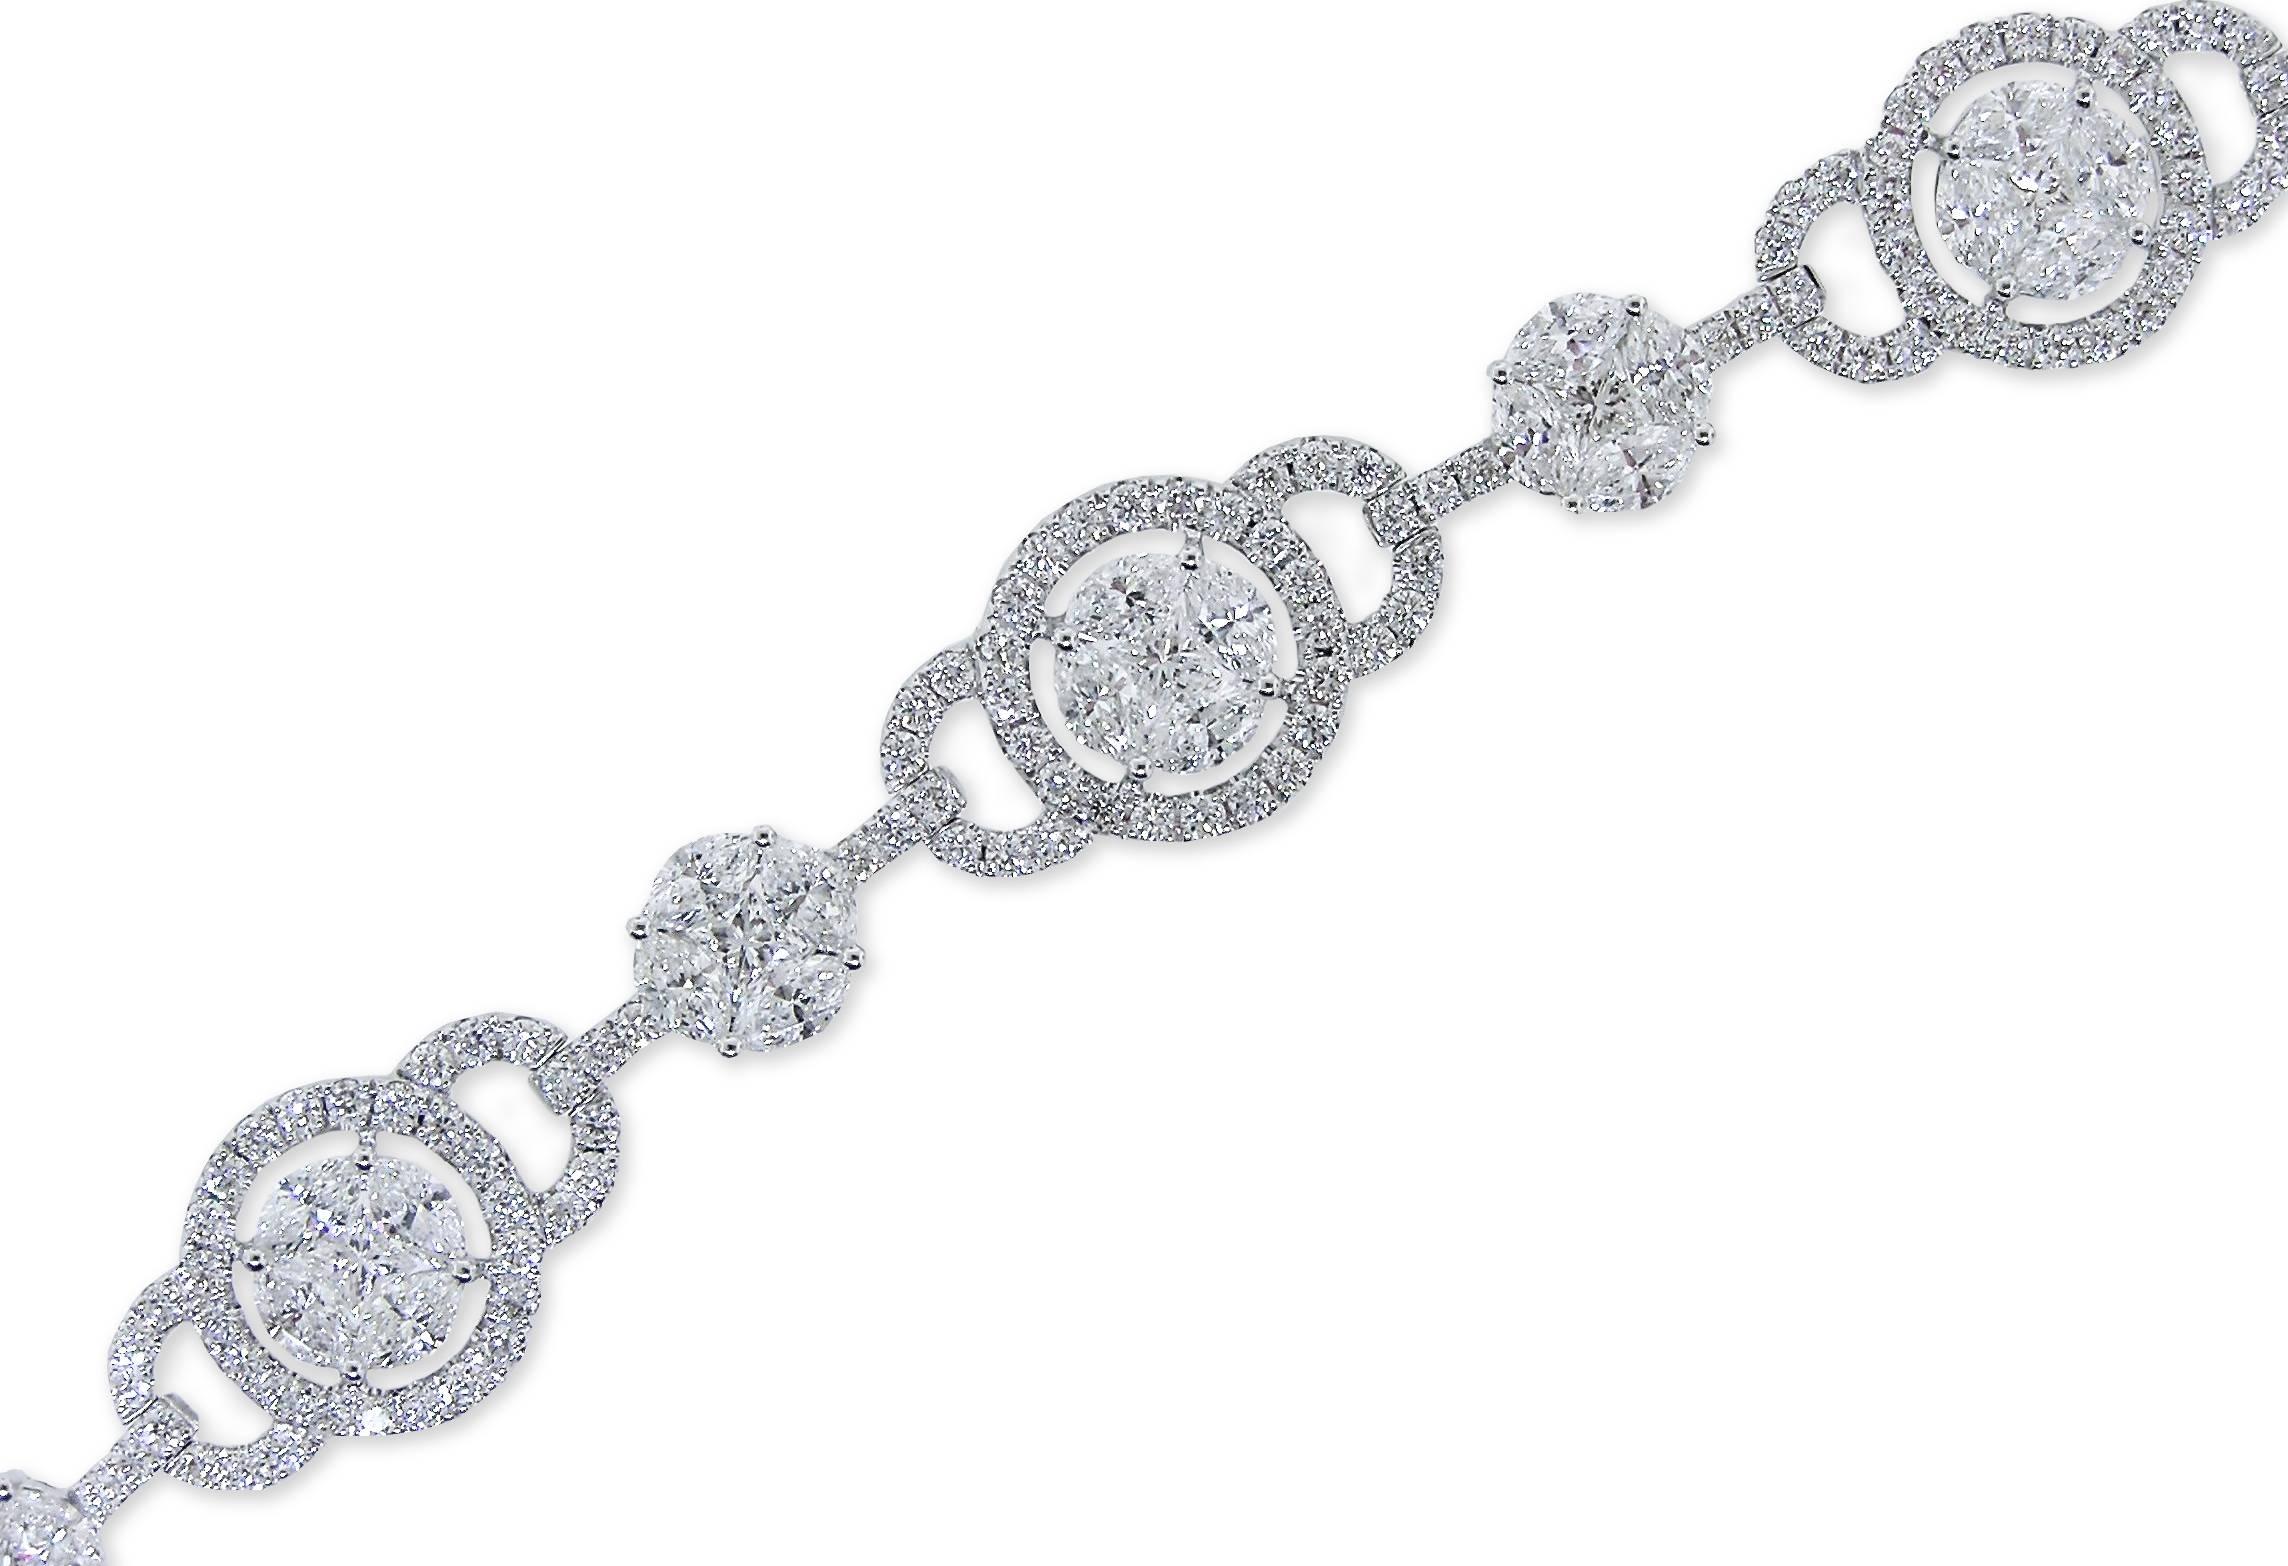 The Deco inspired piece of 18K White Gold with nearly 7 Carats of Princess, Marquise and Round Diamonds of high quality.  Wonderfully articulated so it wears so ever deliciously on the wrist.